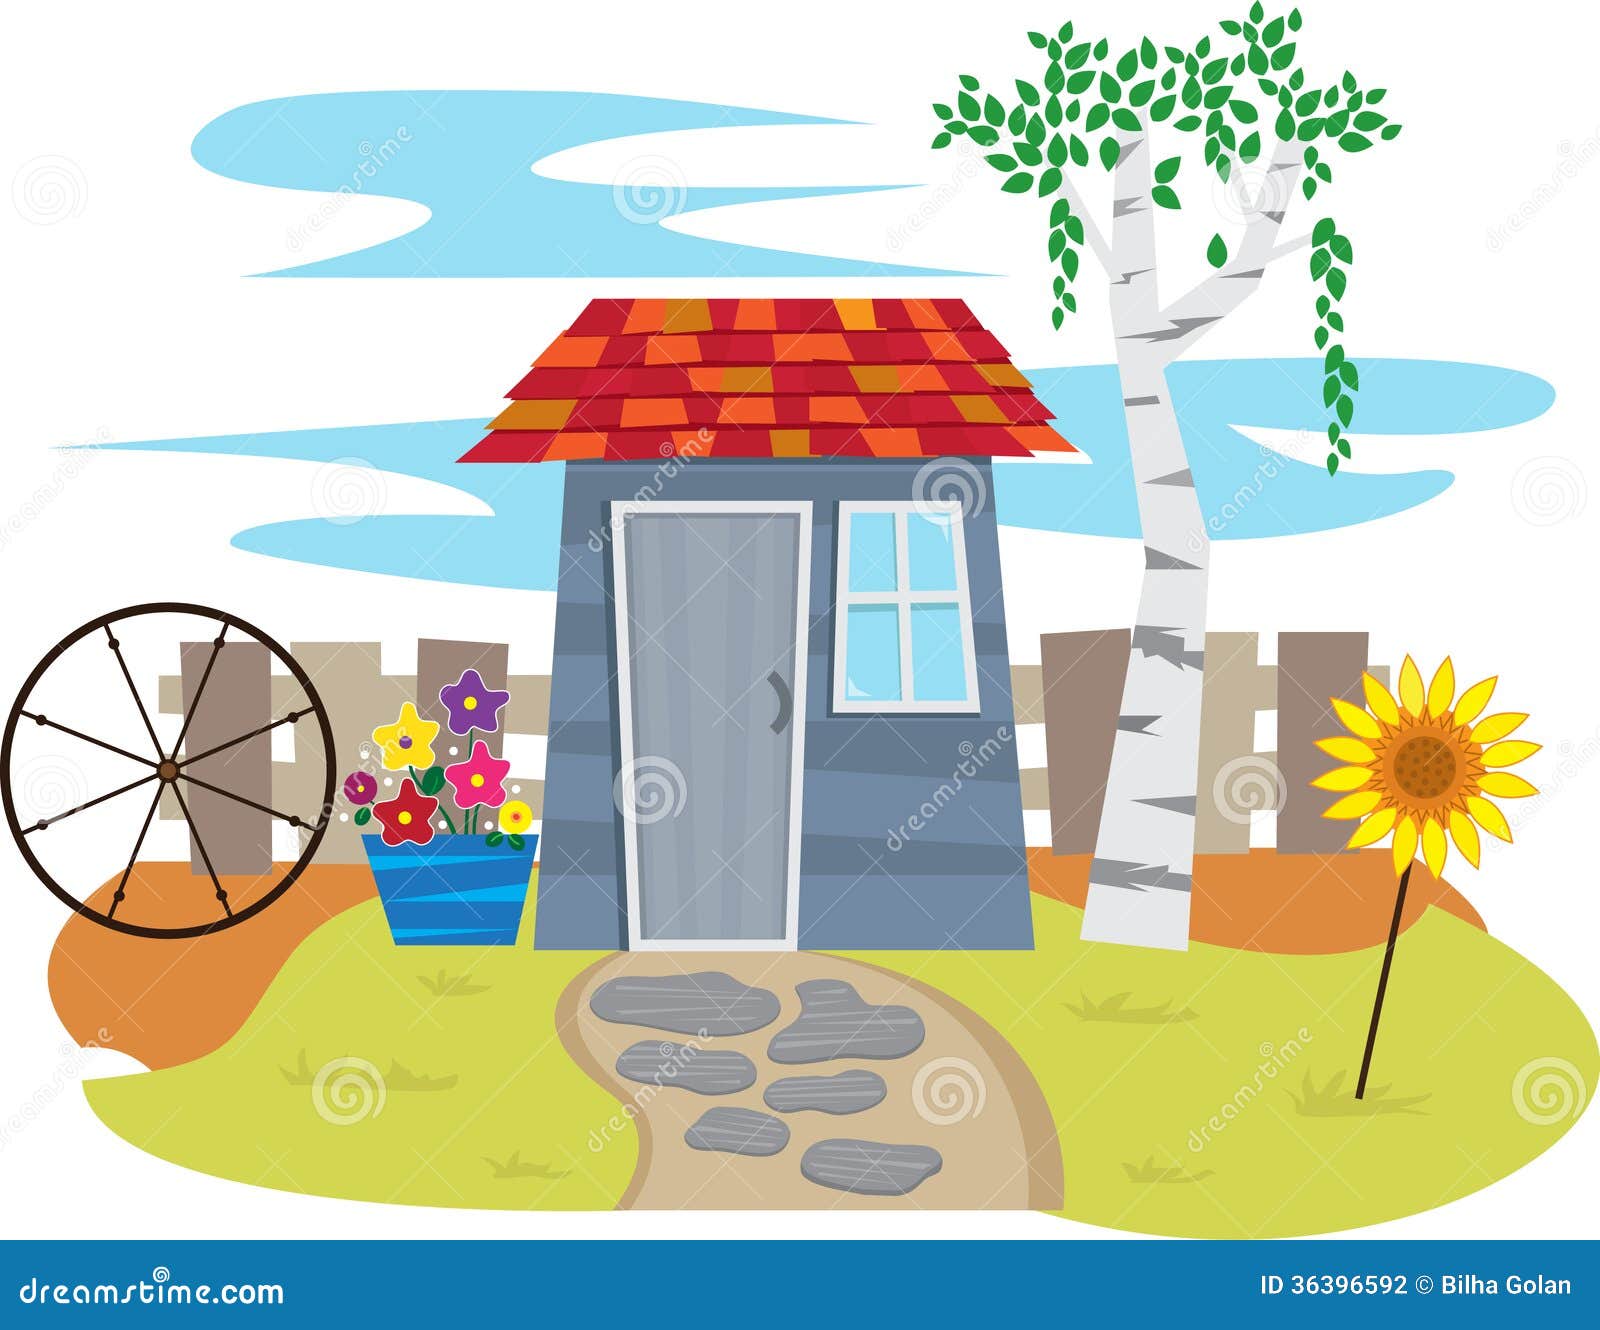 Shed With Fence stock vector. Illustration of lawn, vector ...